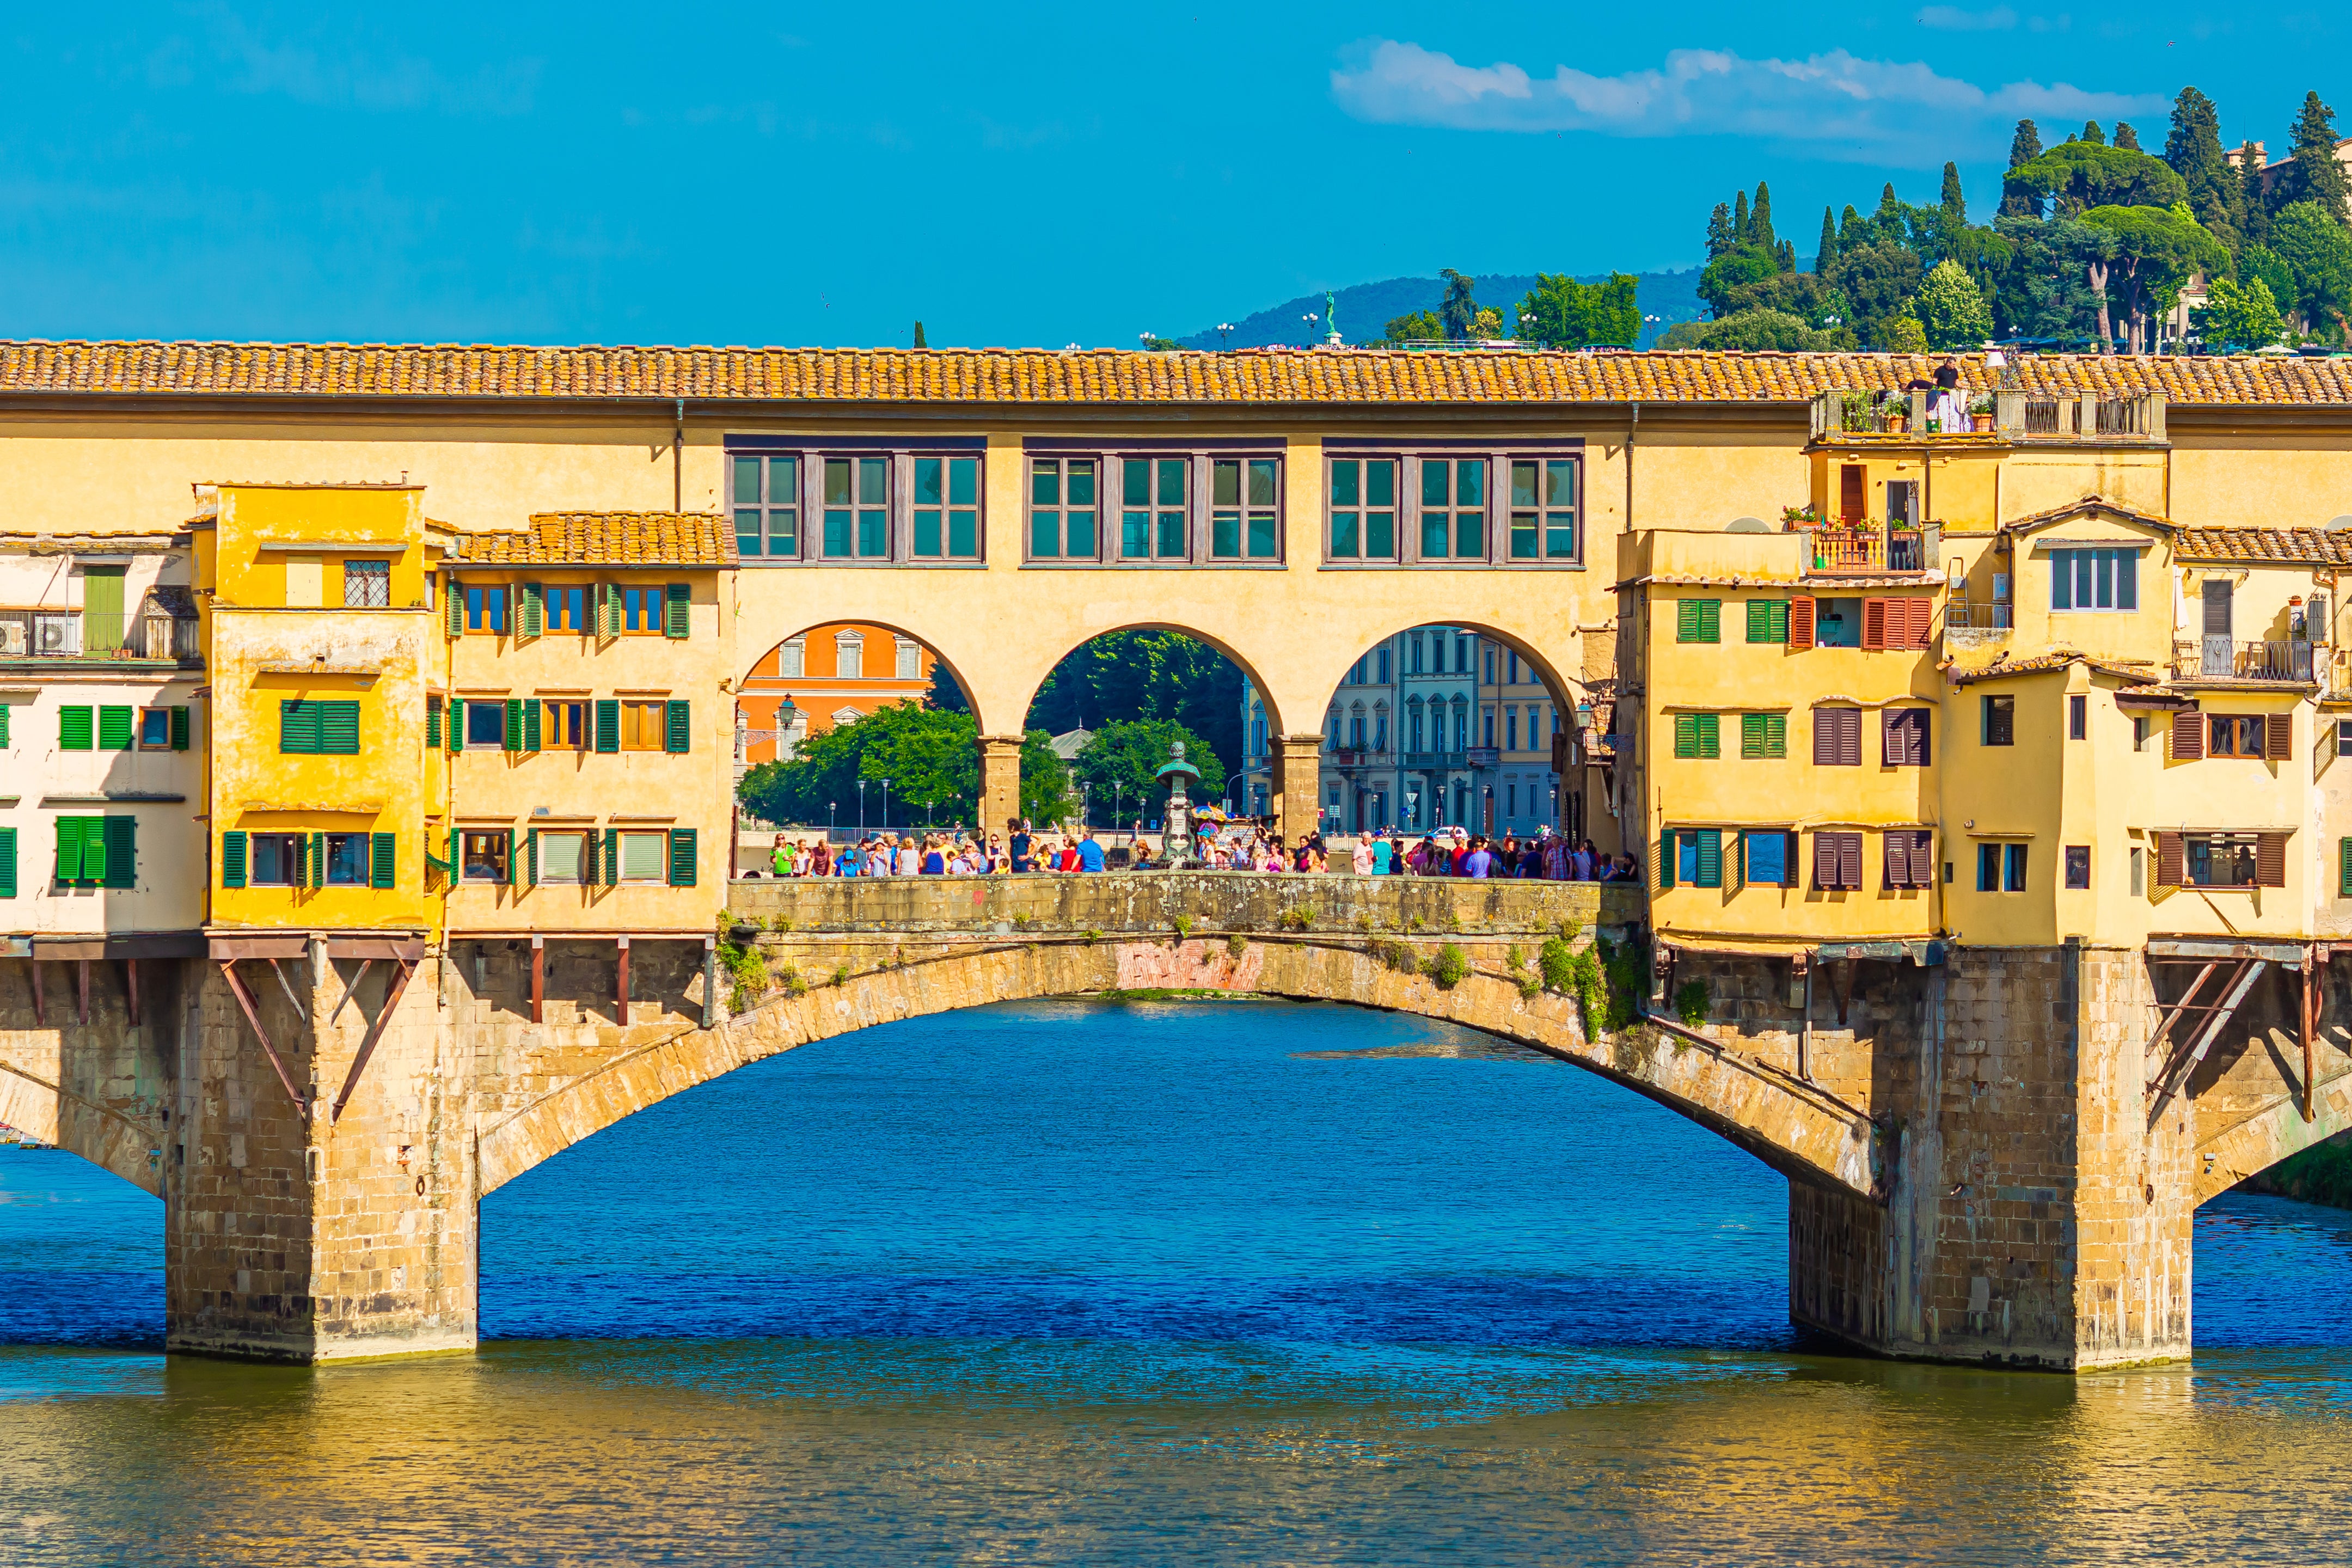 The Tuscan capital is at its best in spring